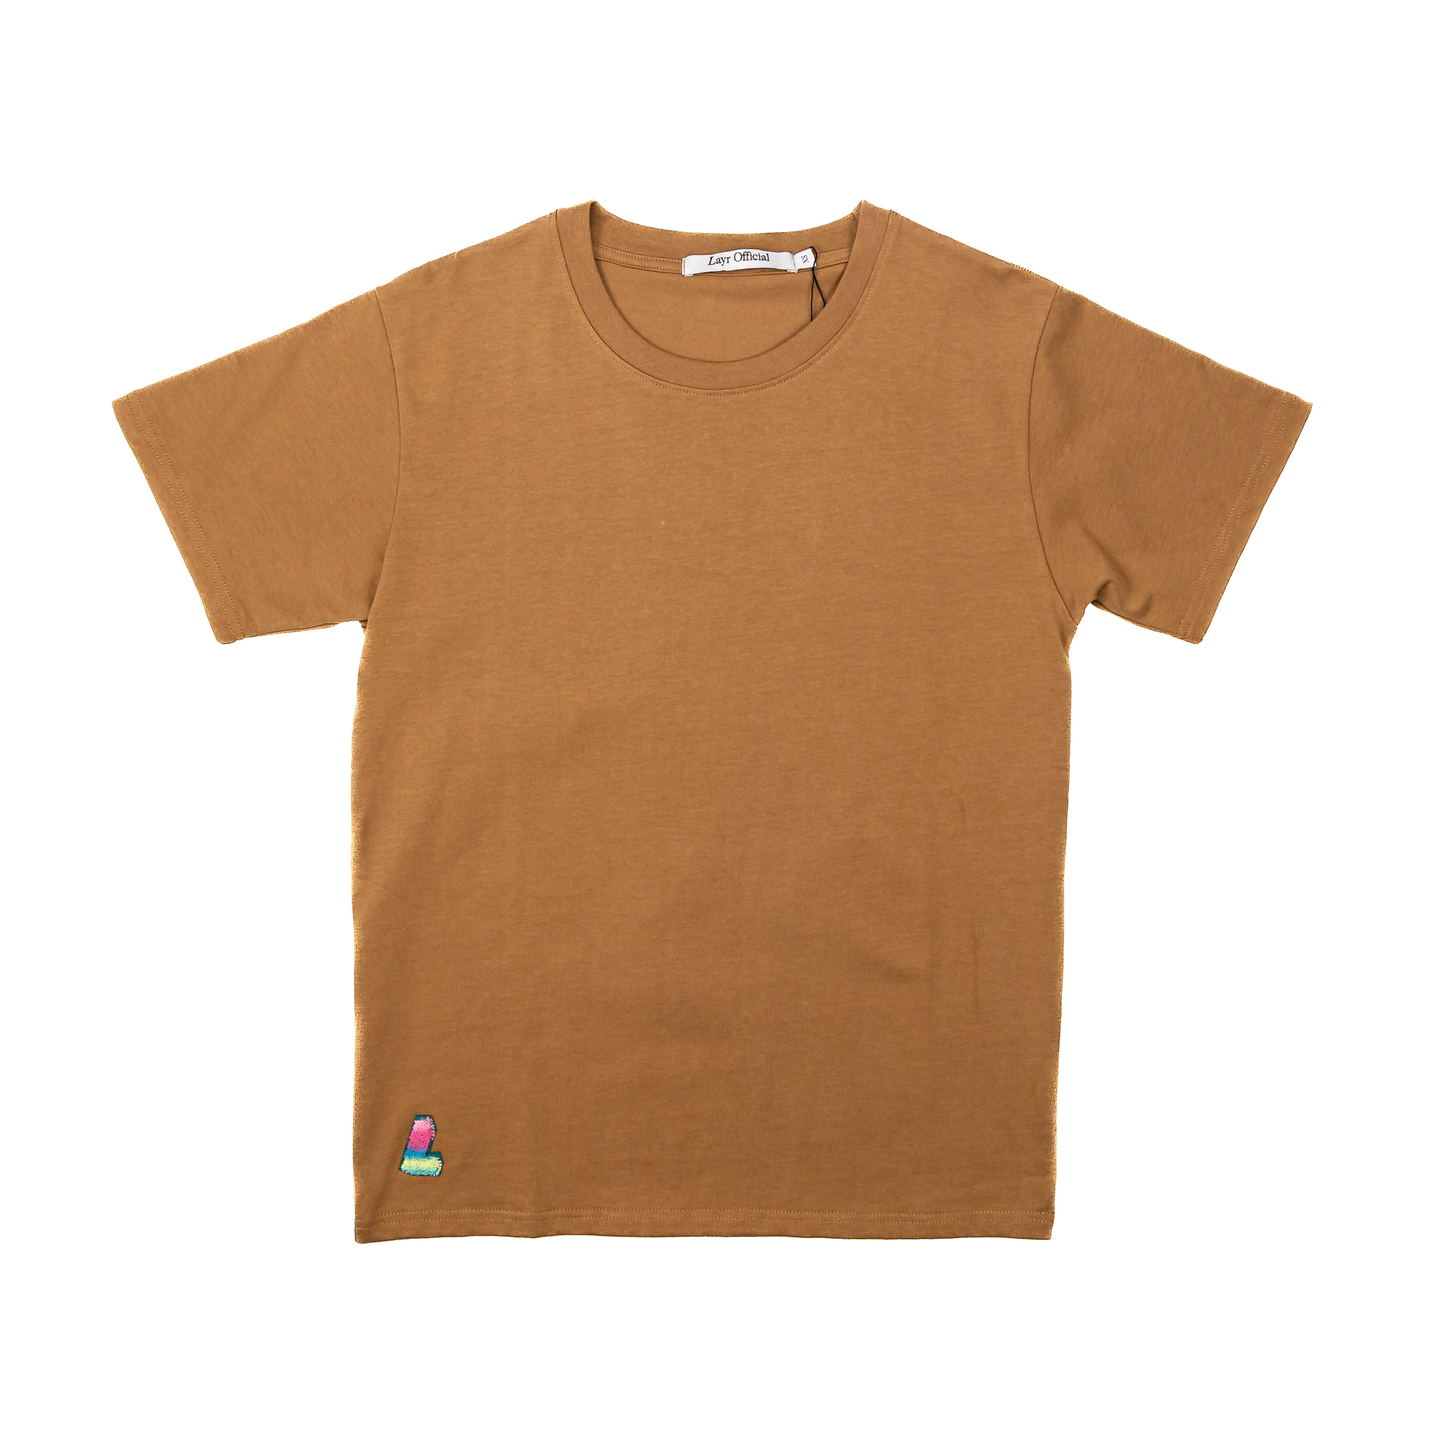 OG L Block Luxury Tee, Washed Brown - Layr Official